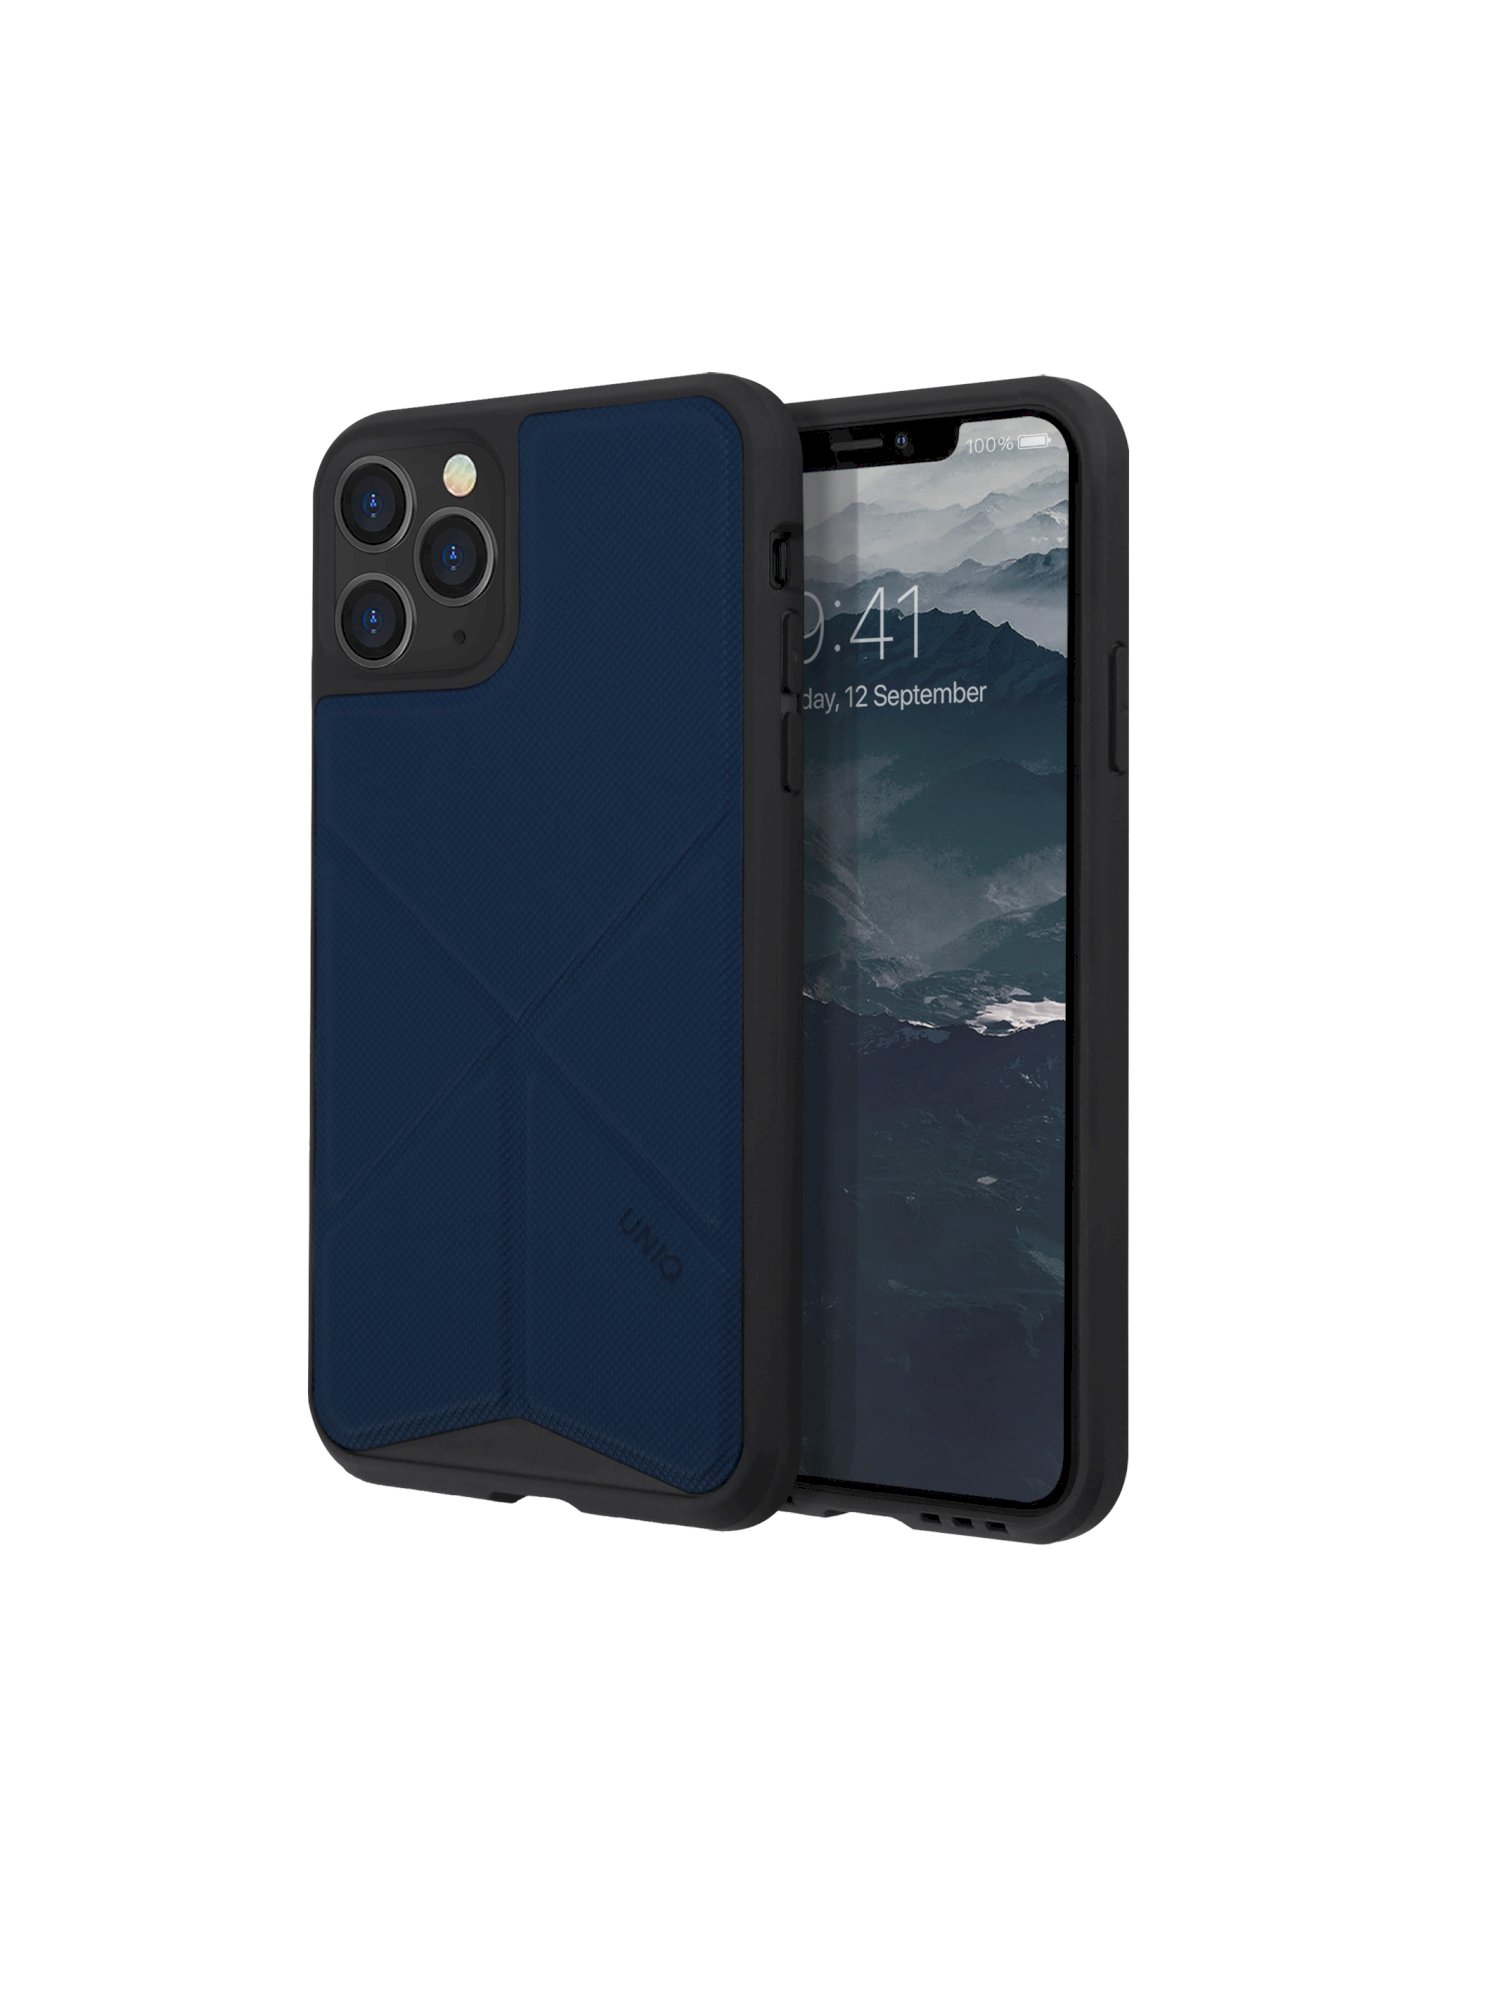 iPhone 11 Pro, case transforma, stand up navy panther, blue